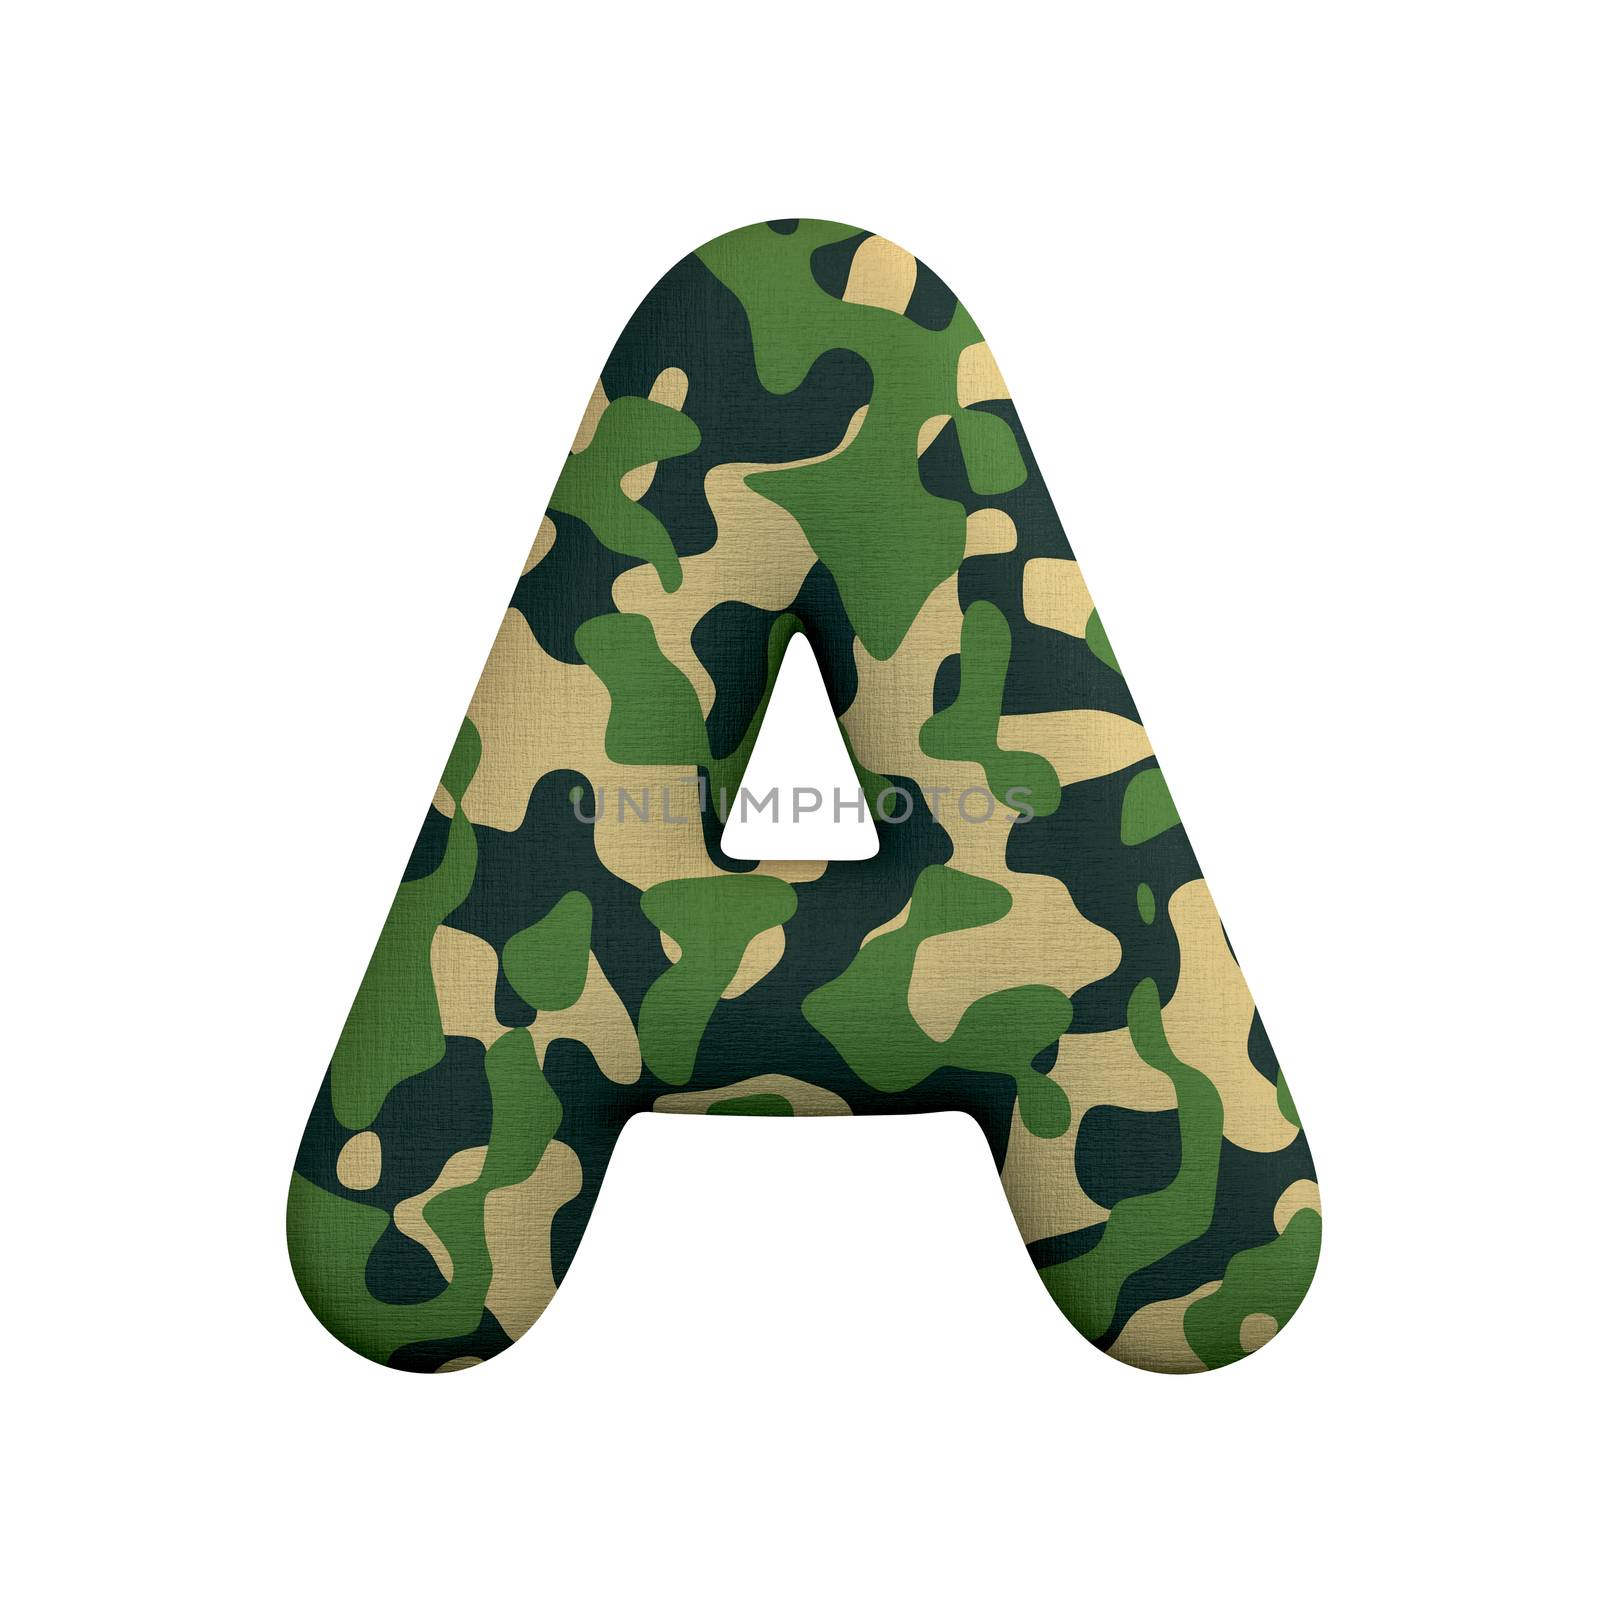 Army letter A - Capital 3d Camo font - Army, war or survivalism concept by chrisroll